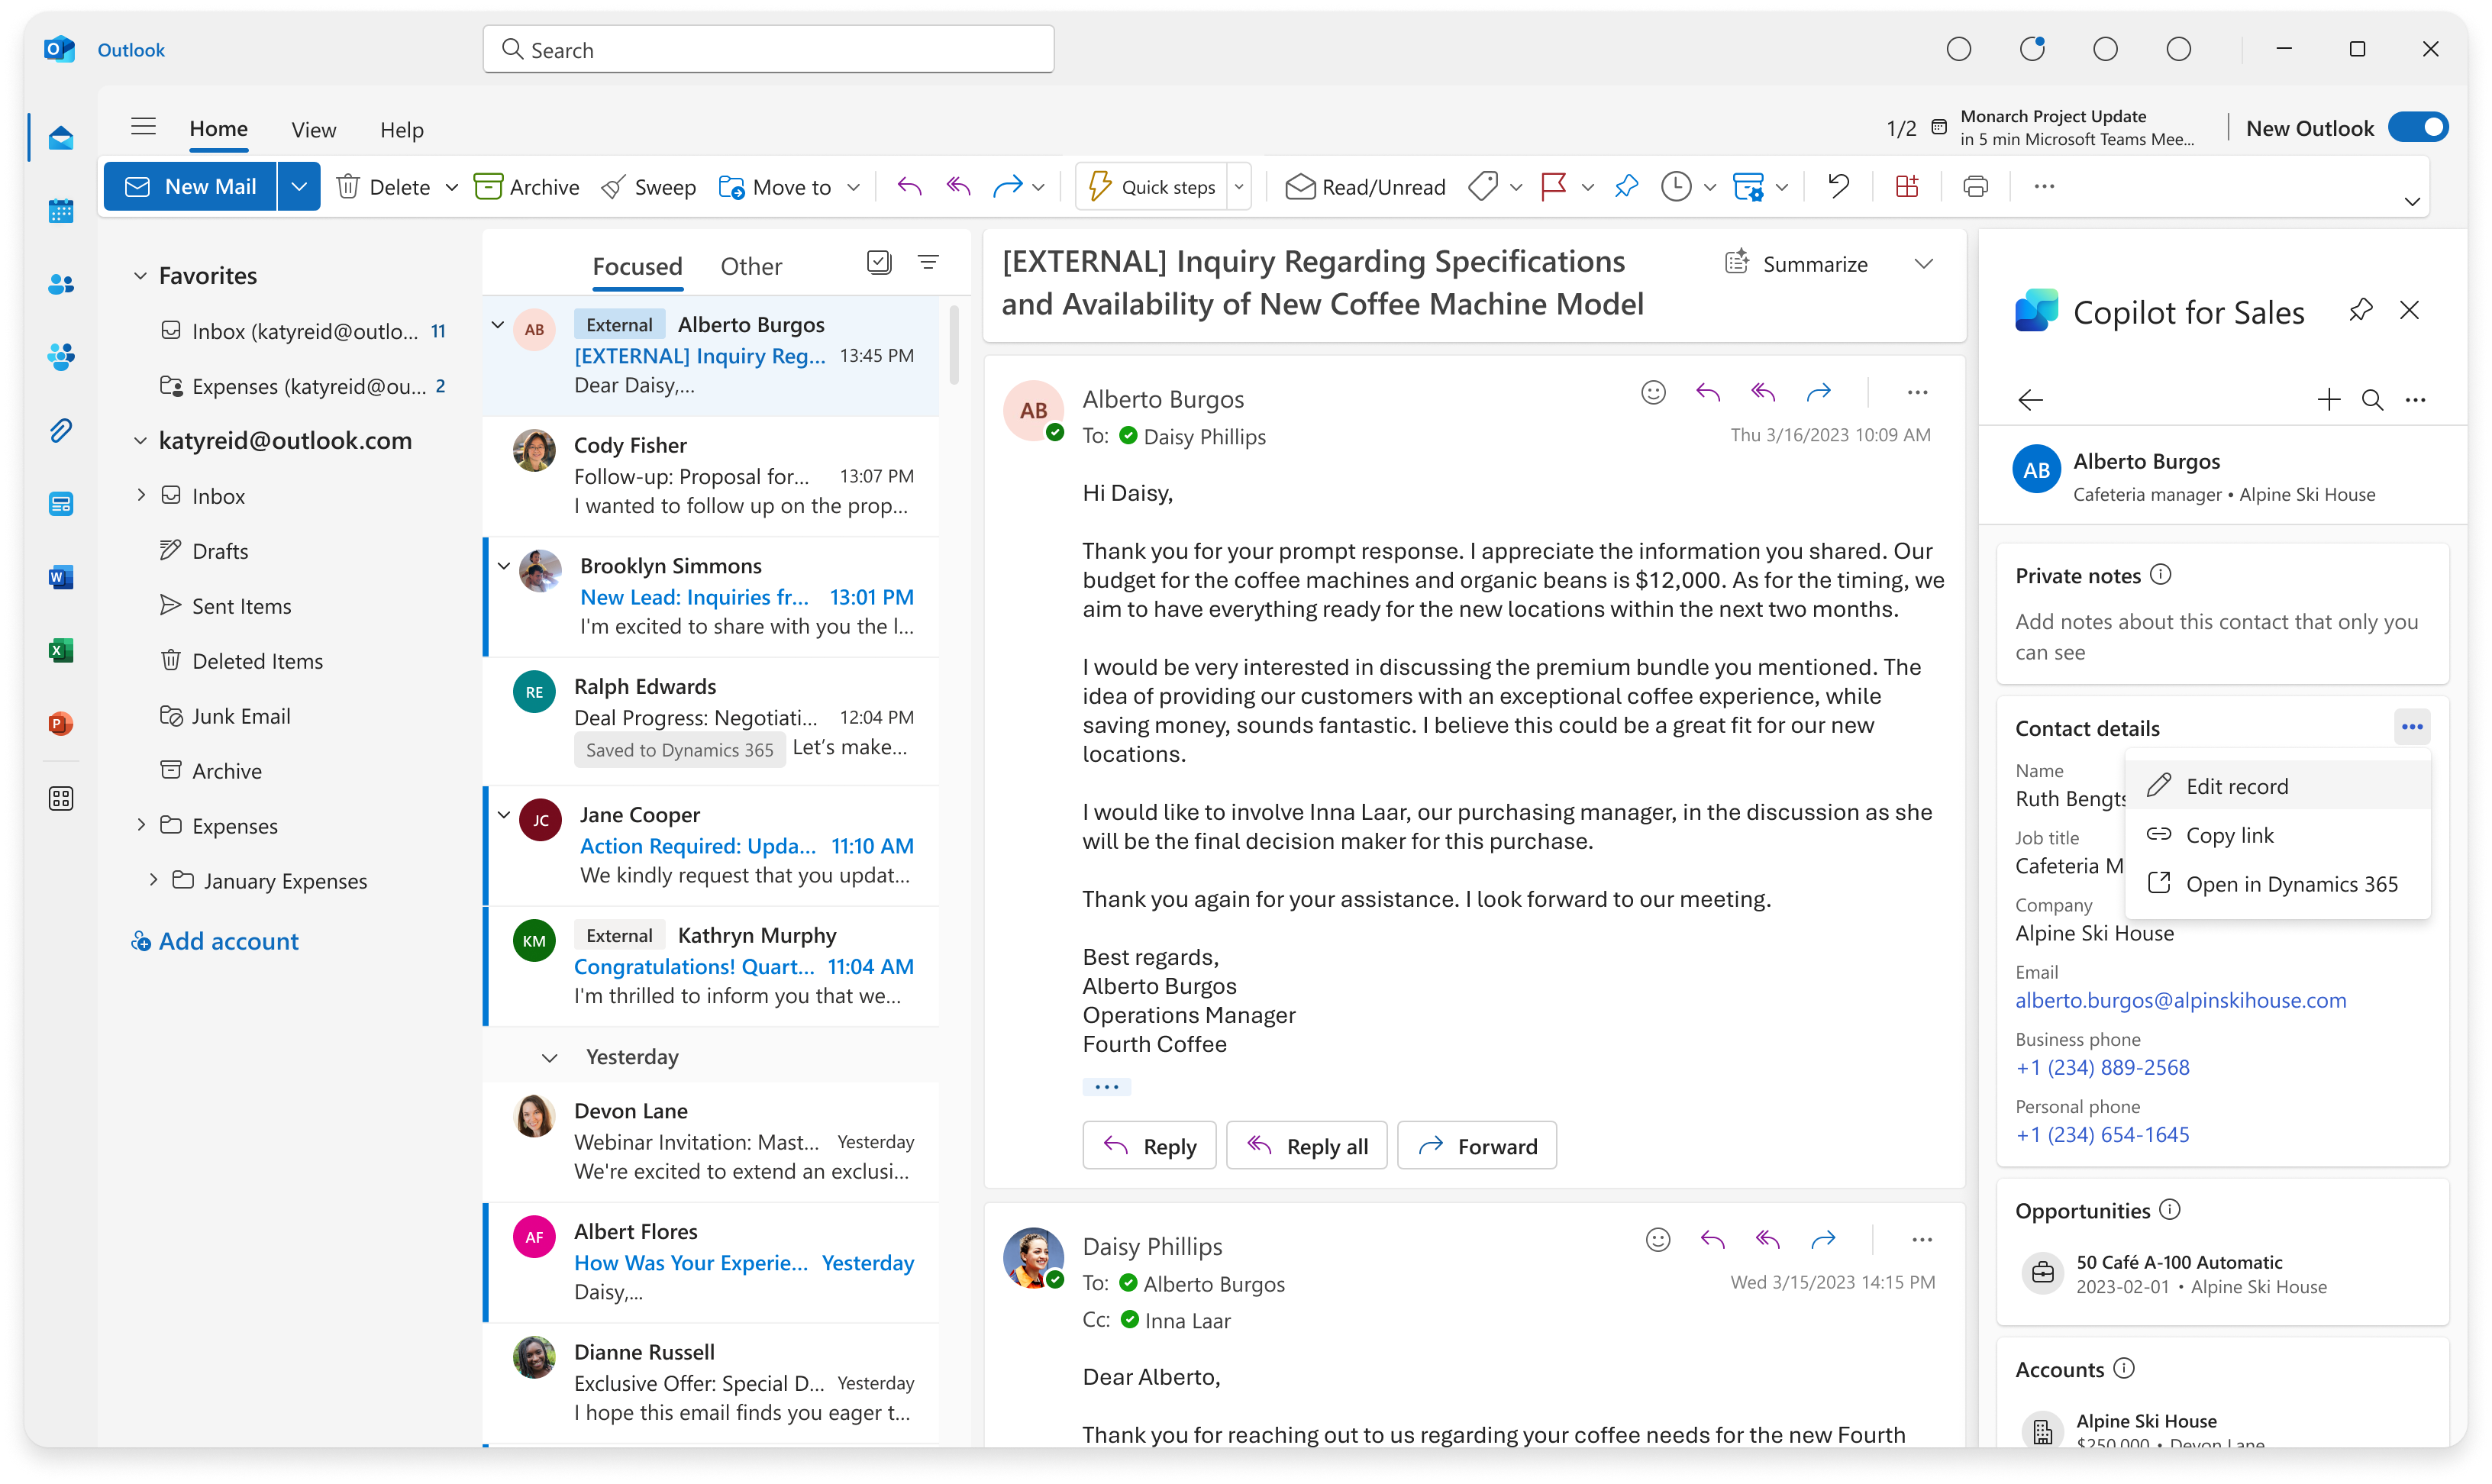 An e-mail opened in Microsoft Outlook with Copilot for Sales enabling the editing of contact record details, copying the link to the record, or opening in your CRM.